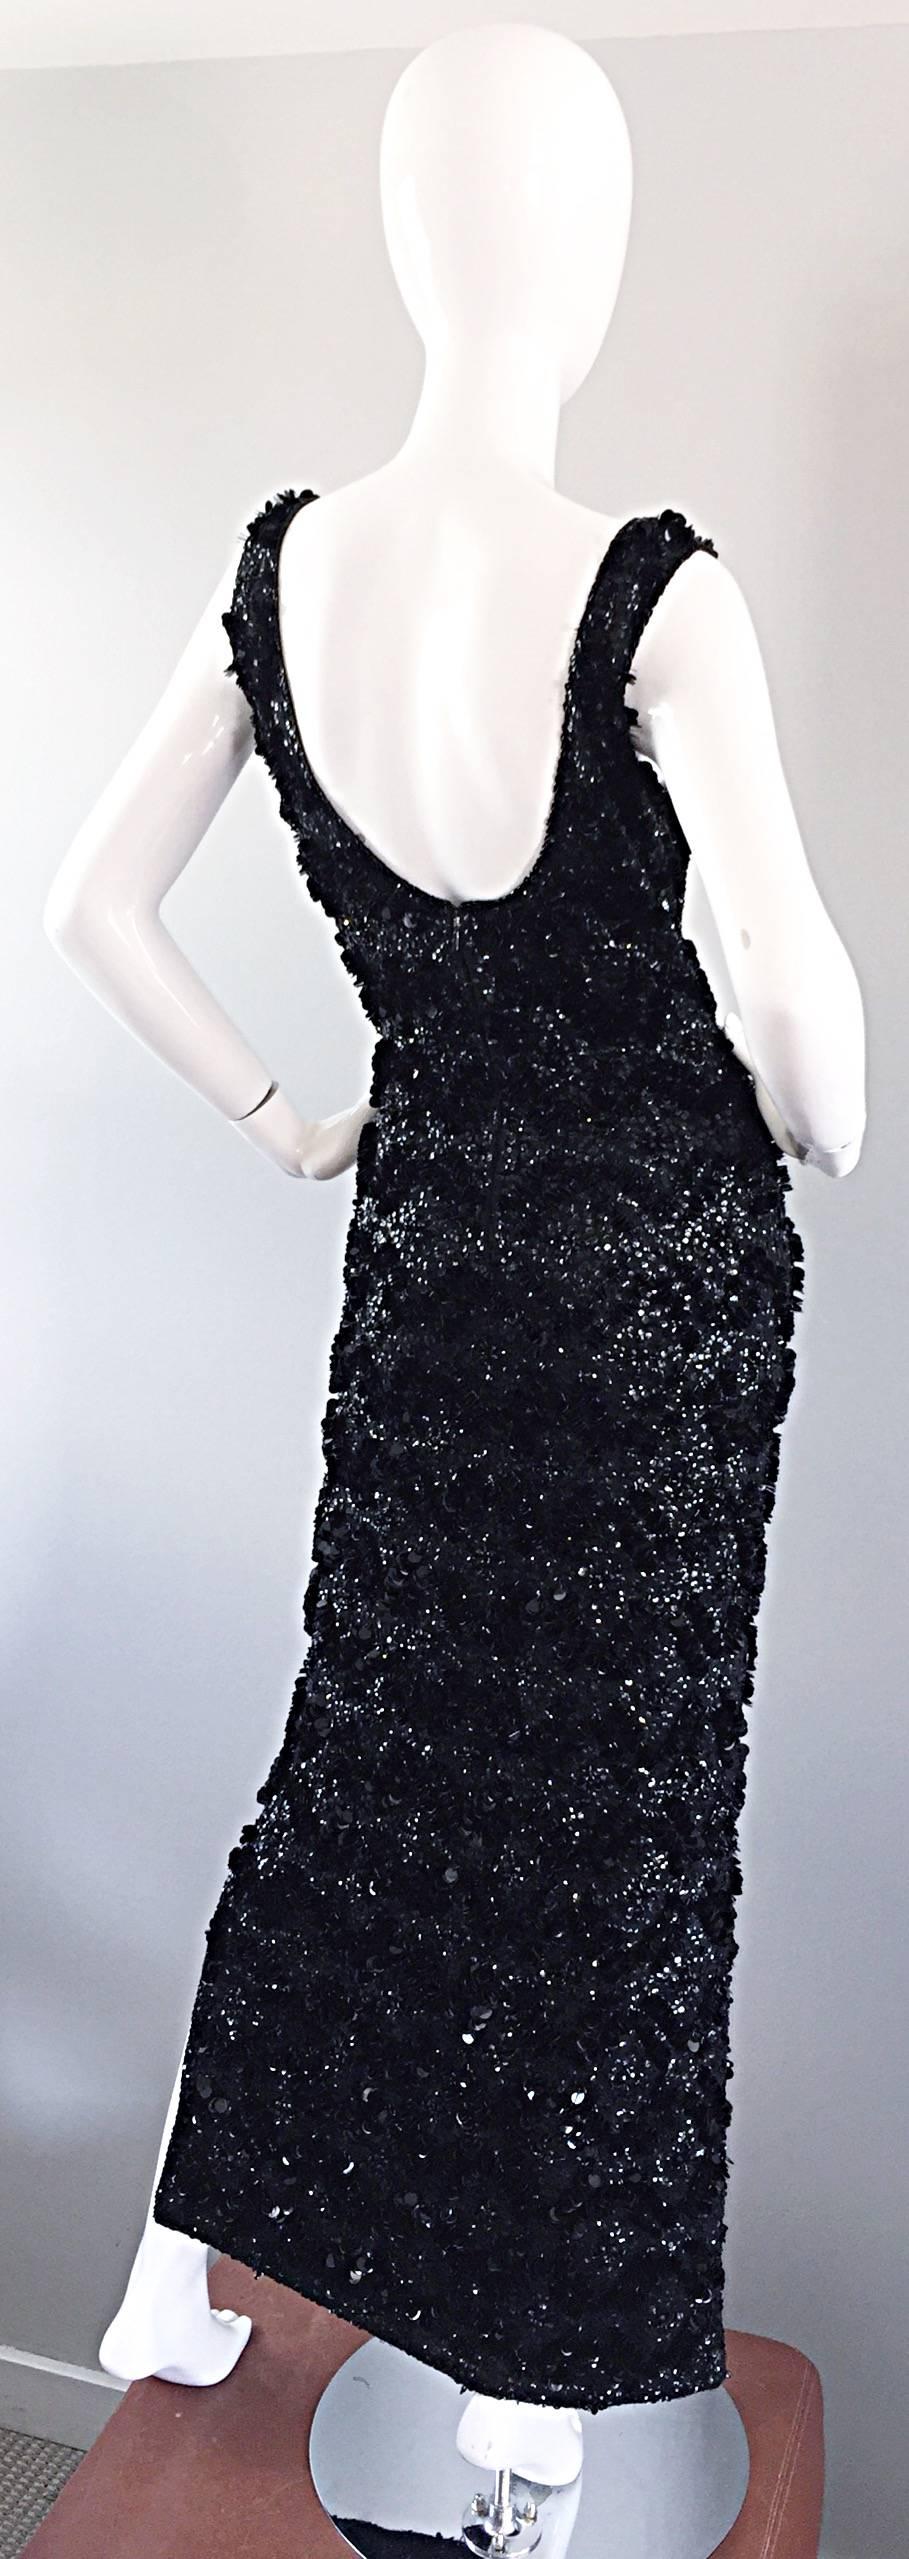 Incredible 1950s Vintage Black Sequin Beaded Wool 50s Wiggle Evening Dress Gown  For Sale 1